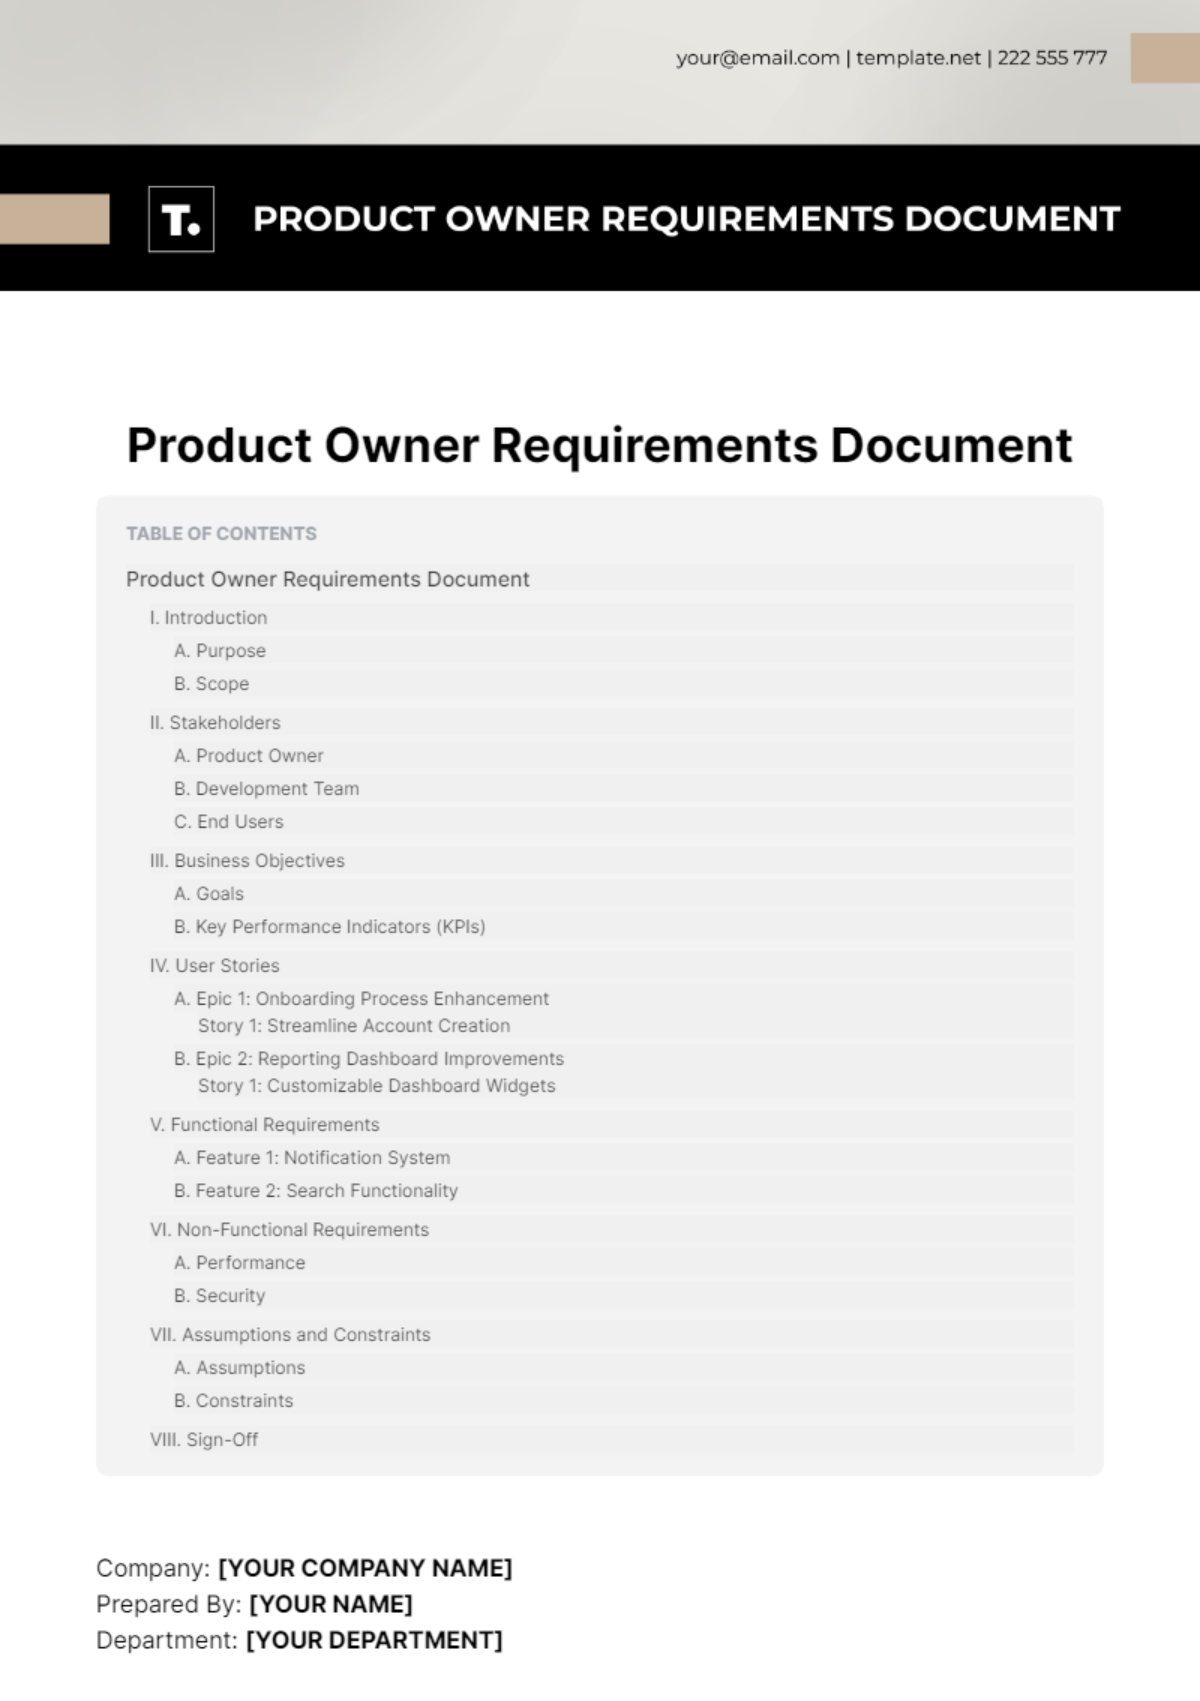 Product Owner Requirements Document Template